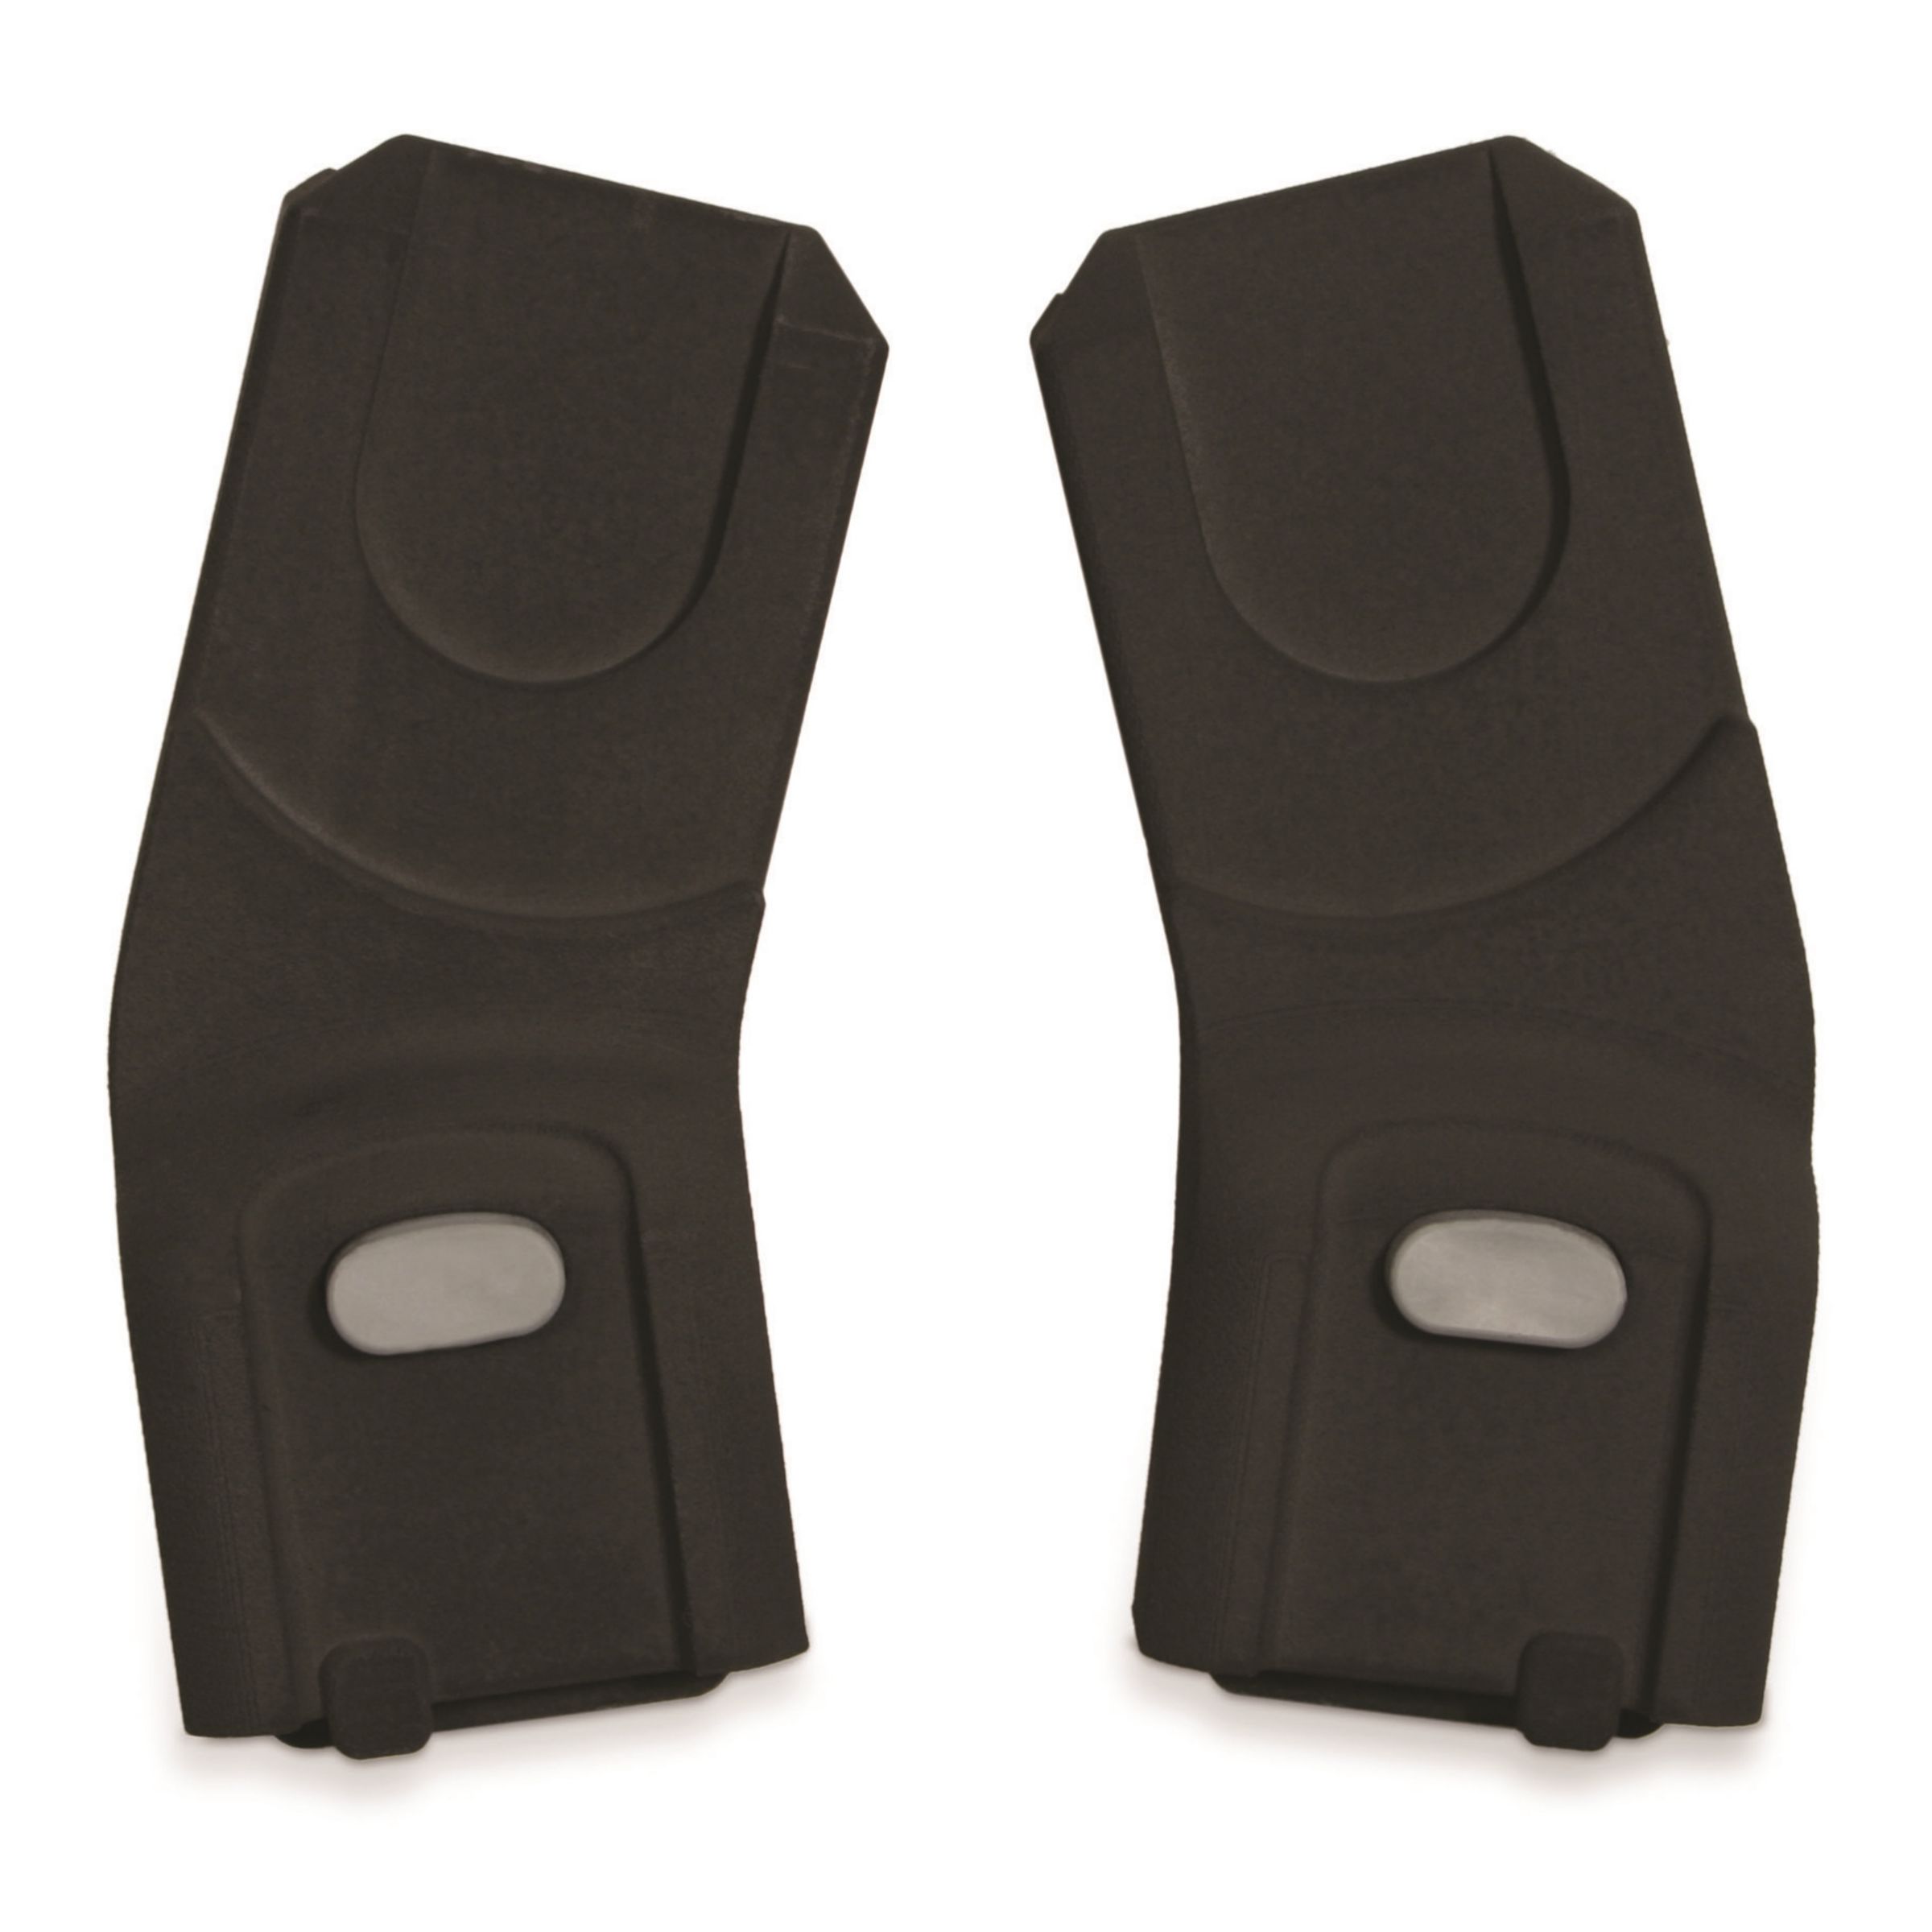 Order the Maxi-Cosi Baby Car Seat Adapters online - Baby Plus